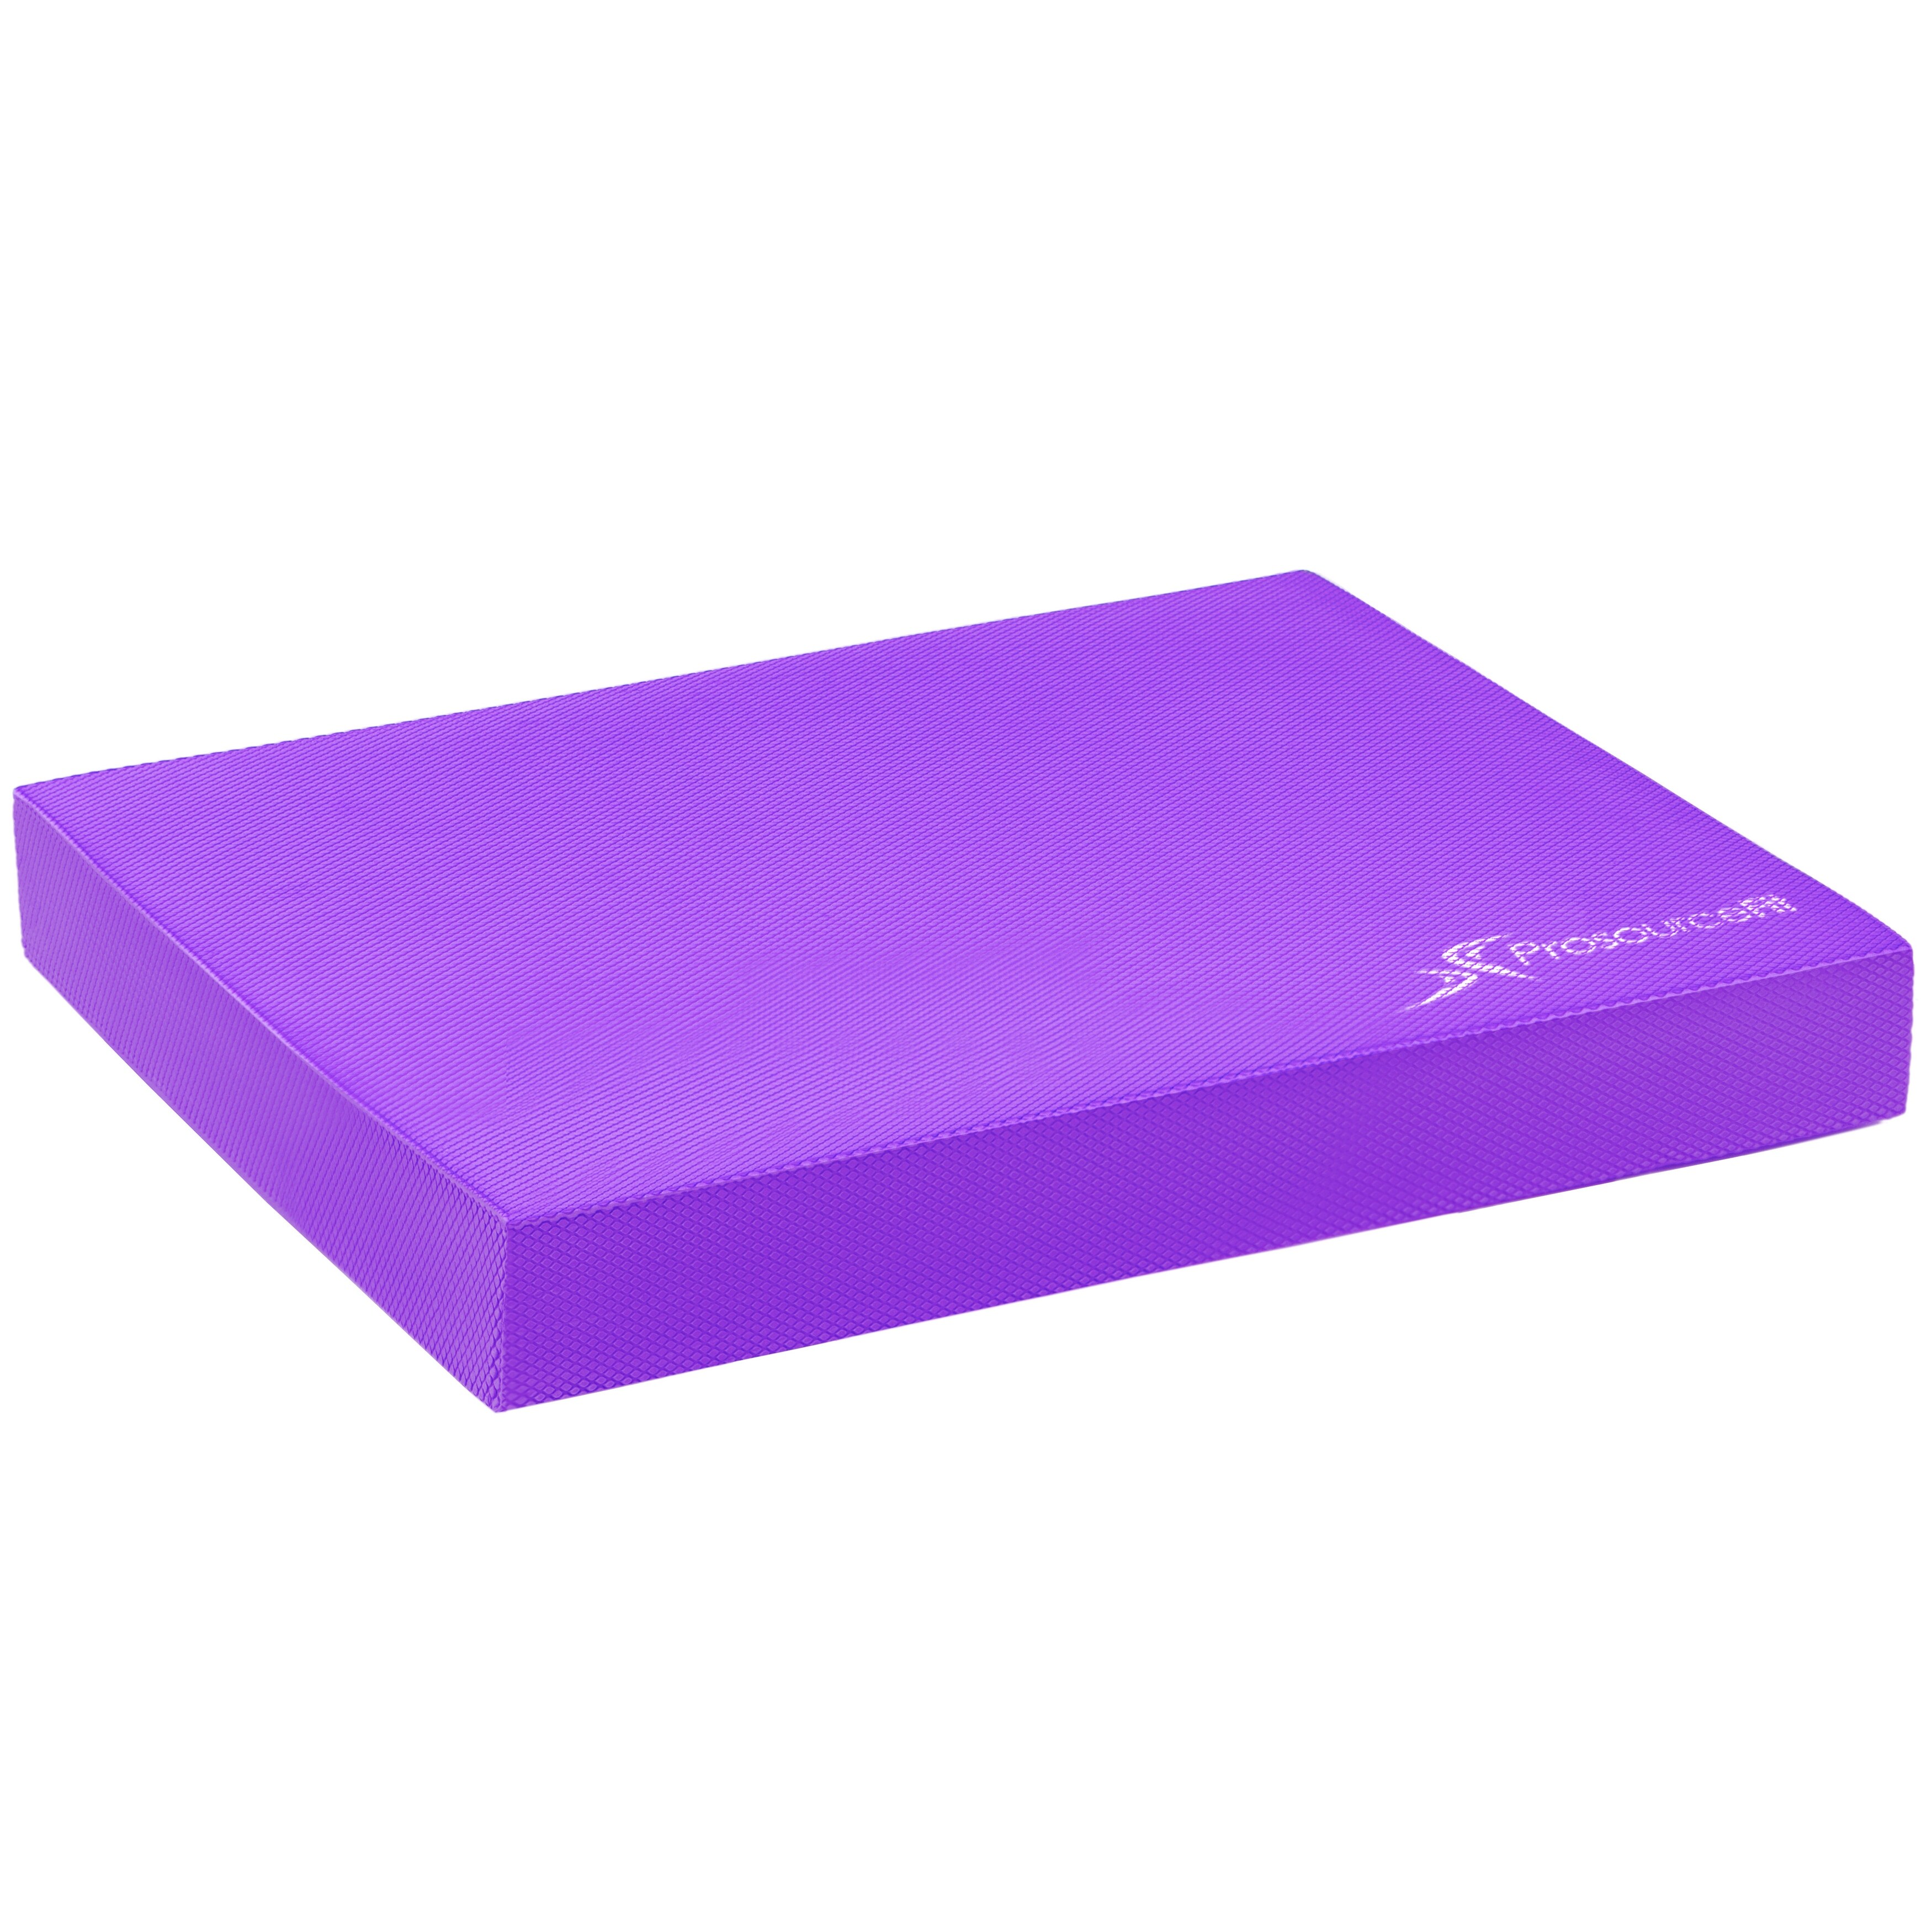 ProsourceFit Exercise Balance Pad made with Non-Slip Cushioned 